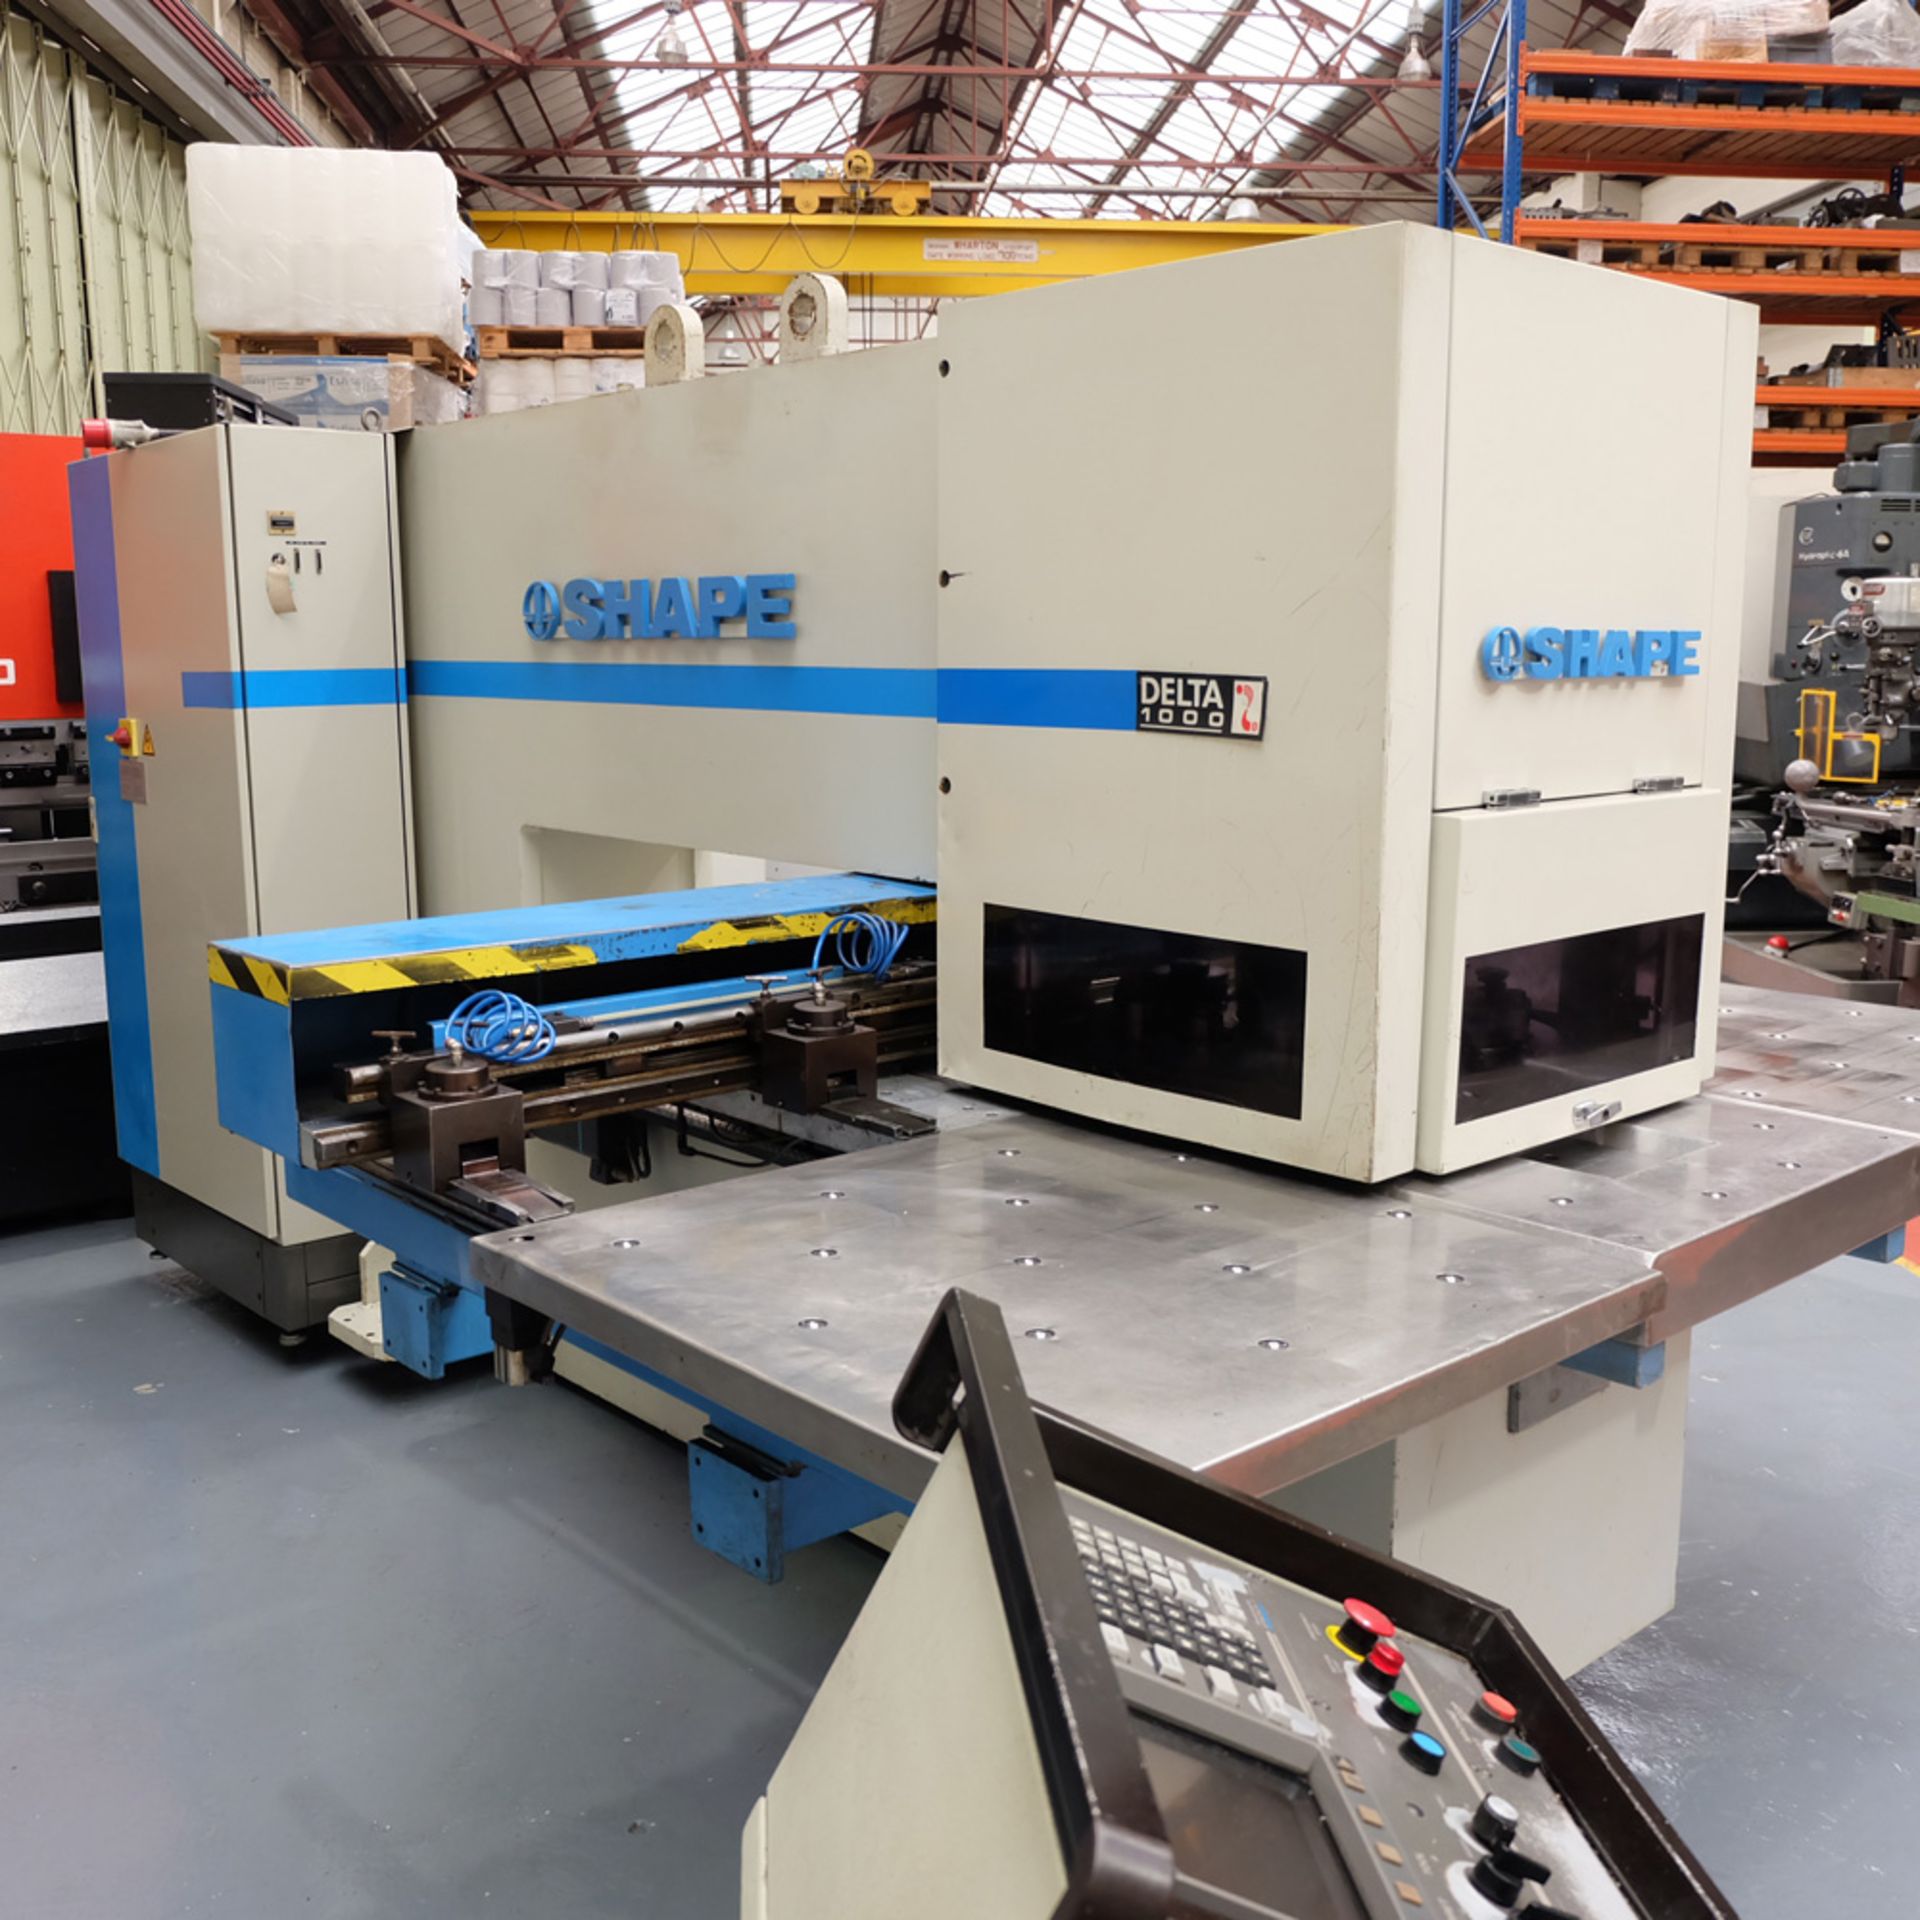 LVD SHAPE Model Delta 1000 Thick CNC Punching Machine.With Fanuc MNC 4000 Control.Capacity: 20 Tons. - Image 6 of 19